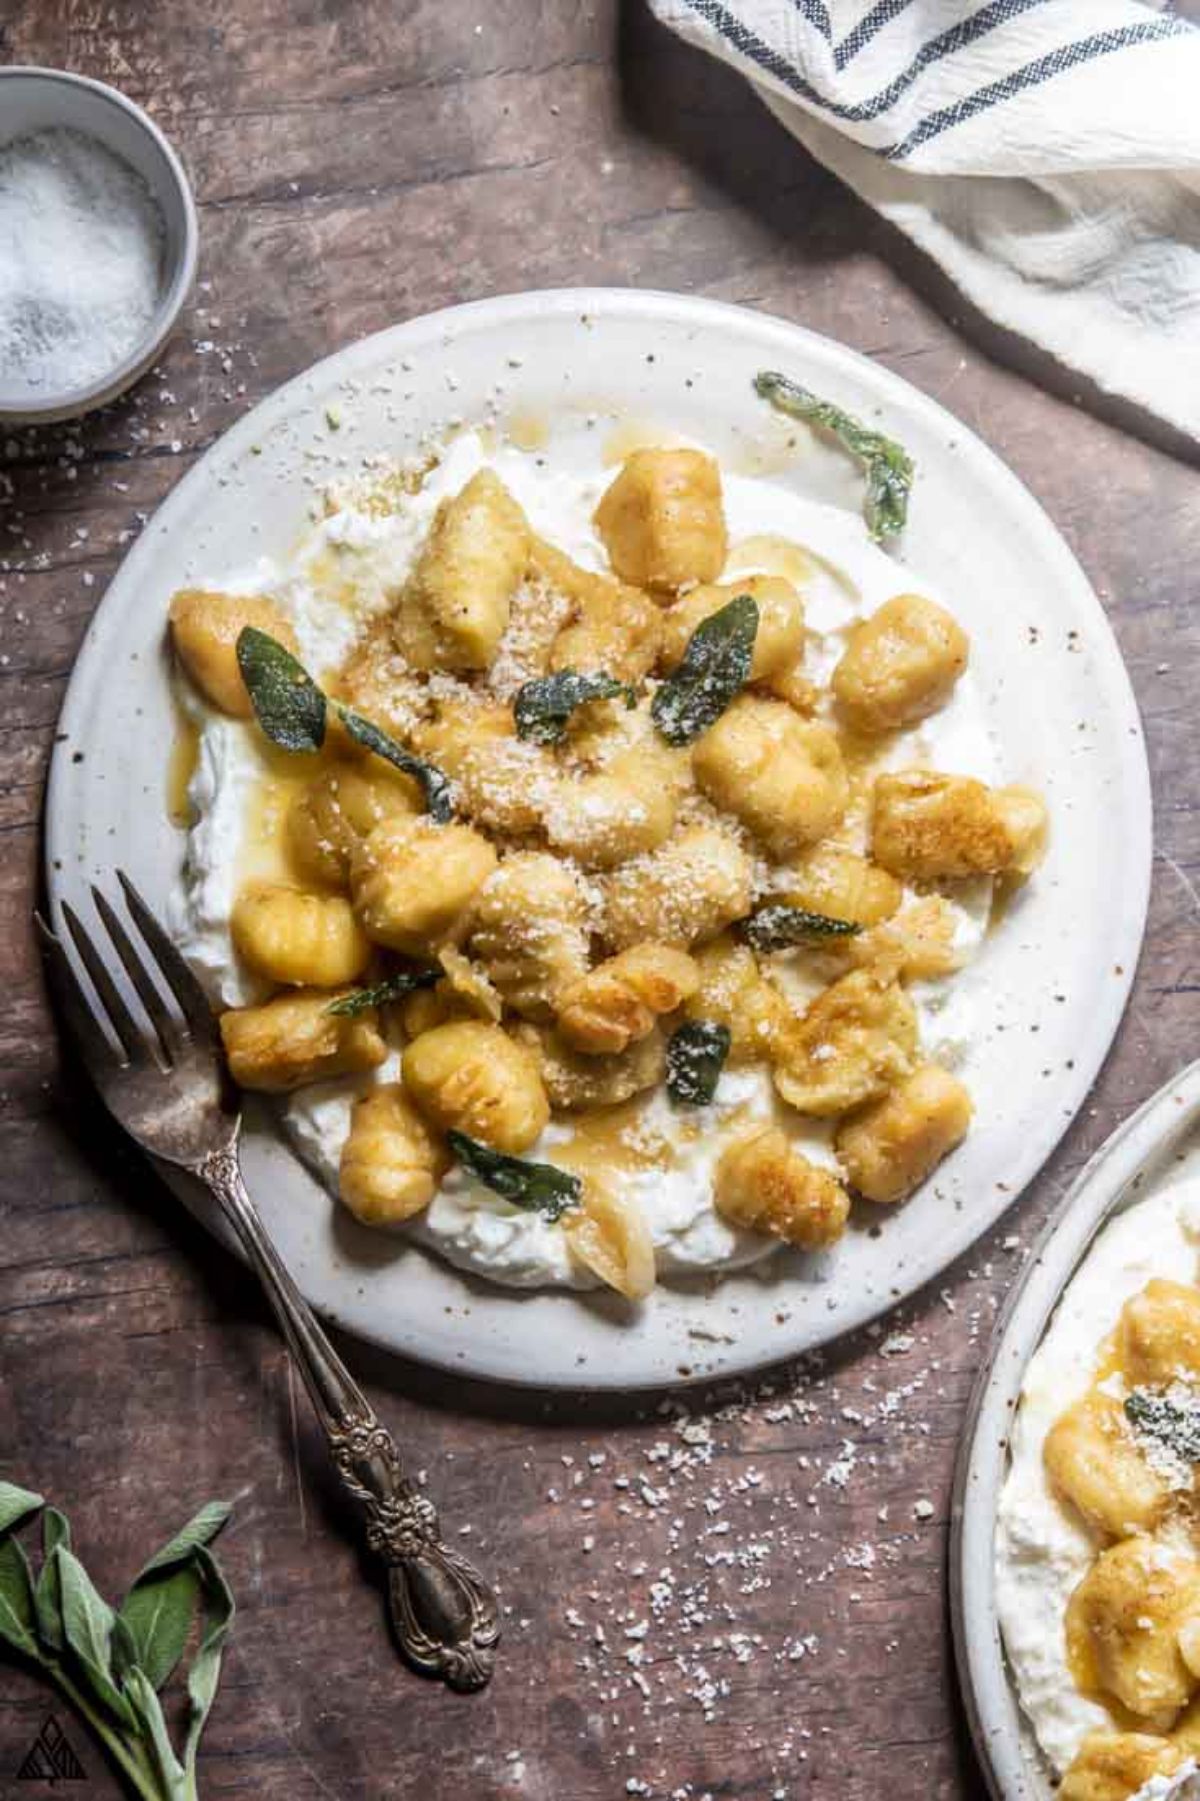 On a dark wooden table is a white plate. On the plate is gnocchi in a creamy sauce with basil leaves. A metal fork is by the side of the plate and a towel sits above it